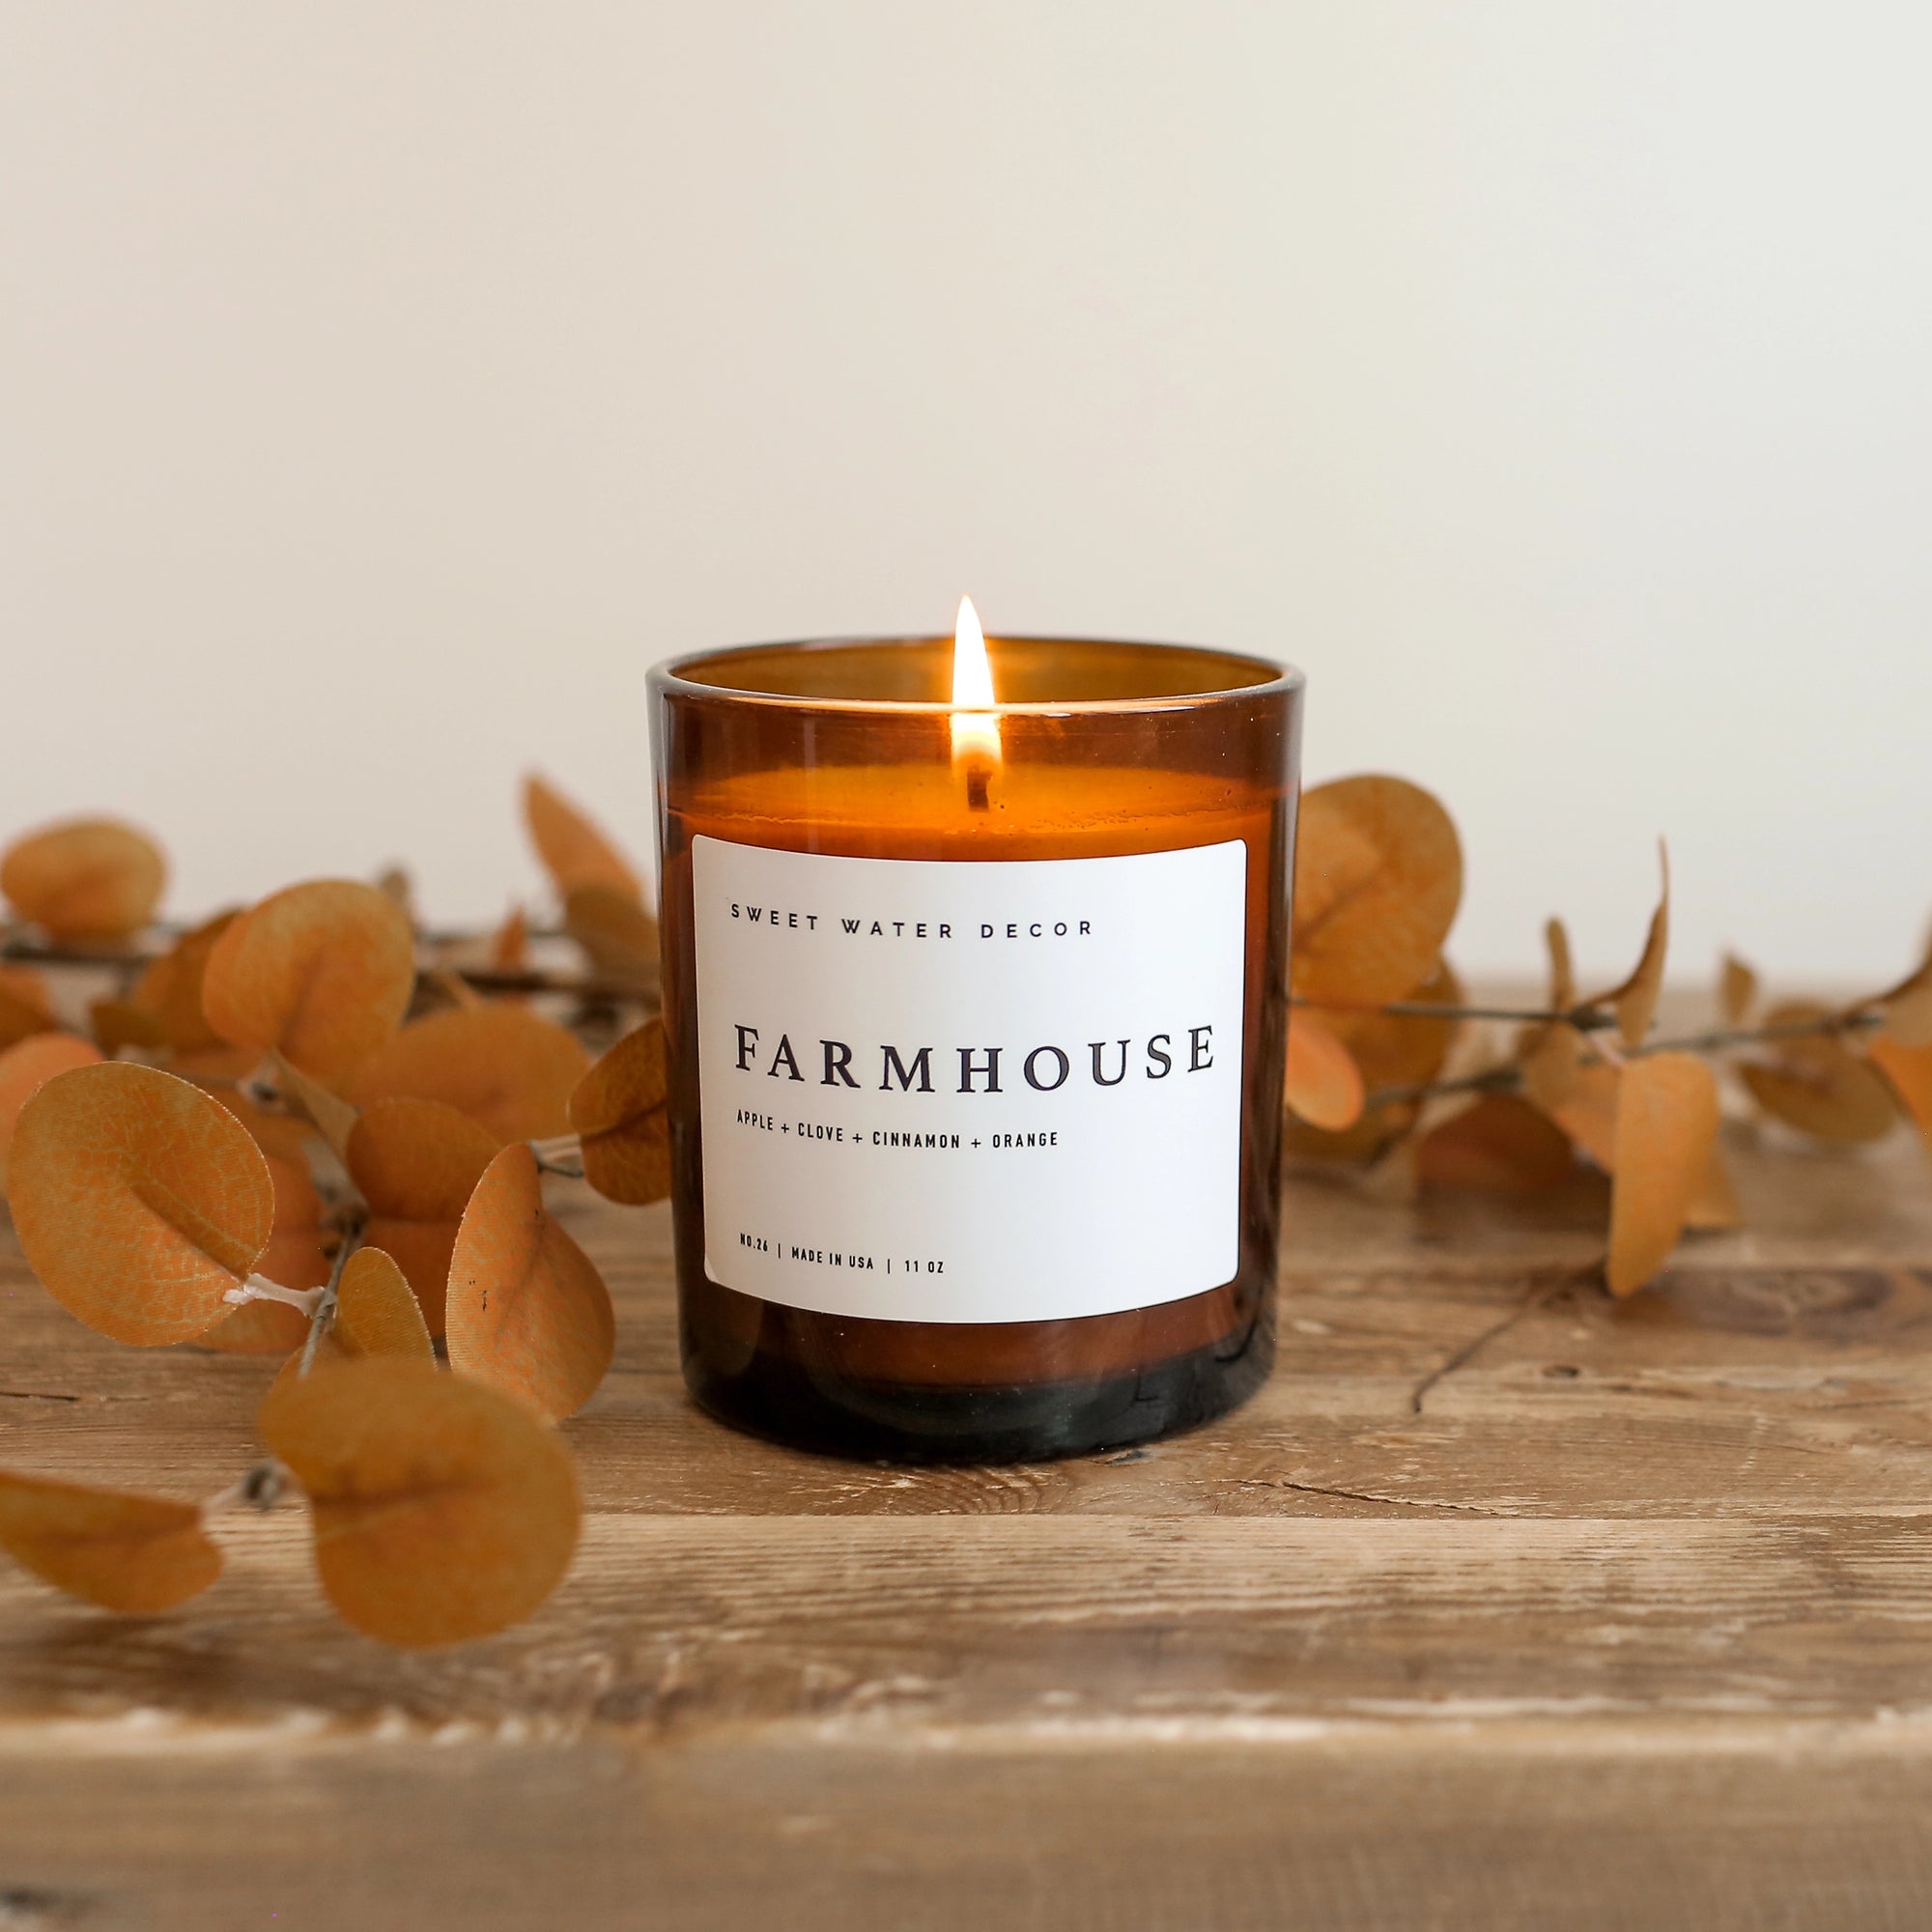 Farmhouse soy candle lit on wooden console with plants behind.